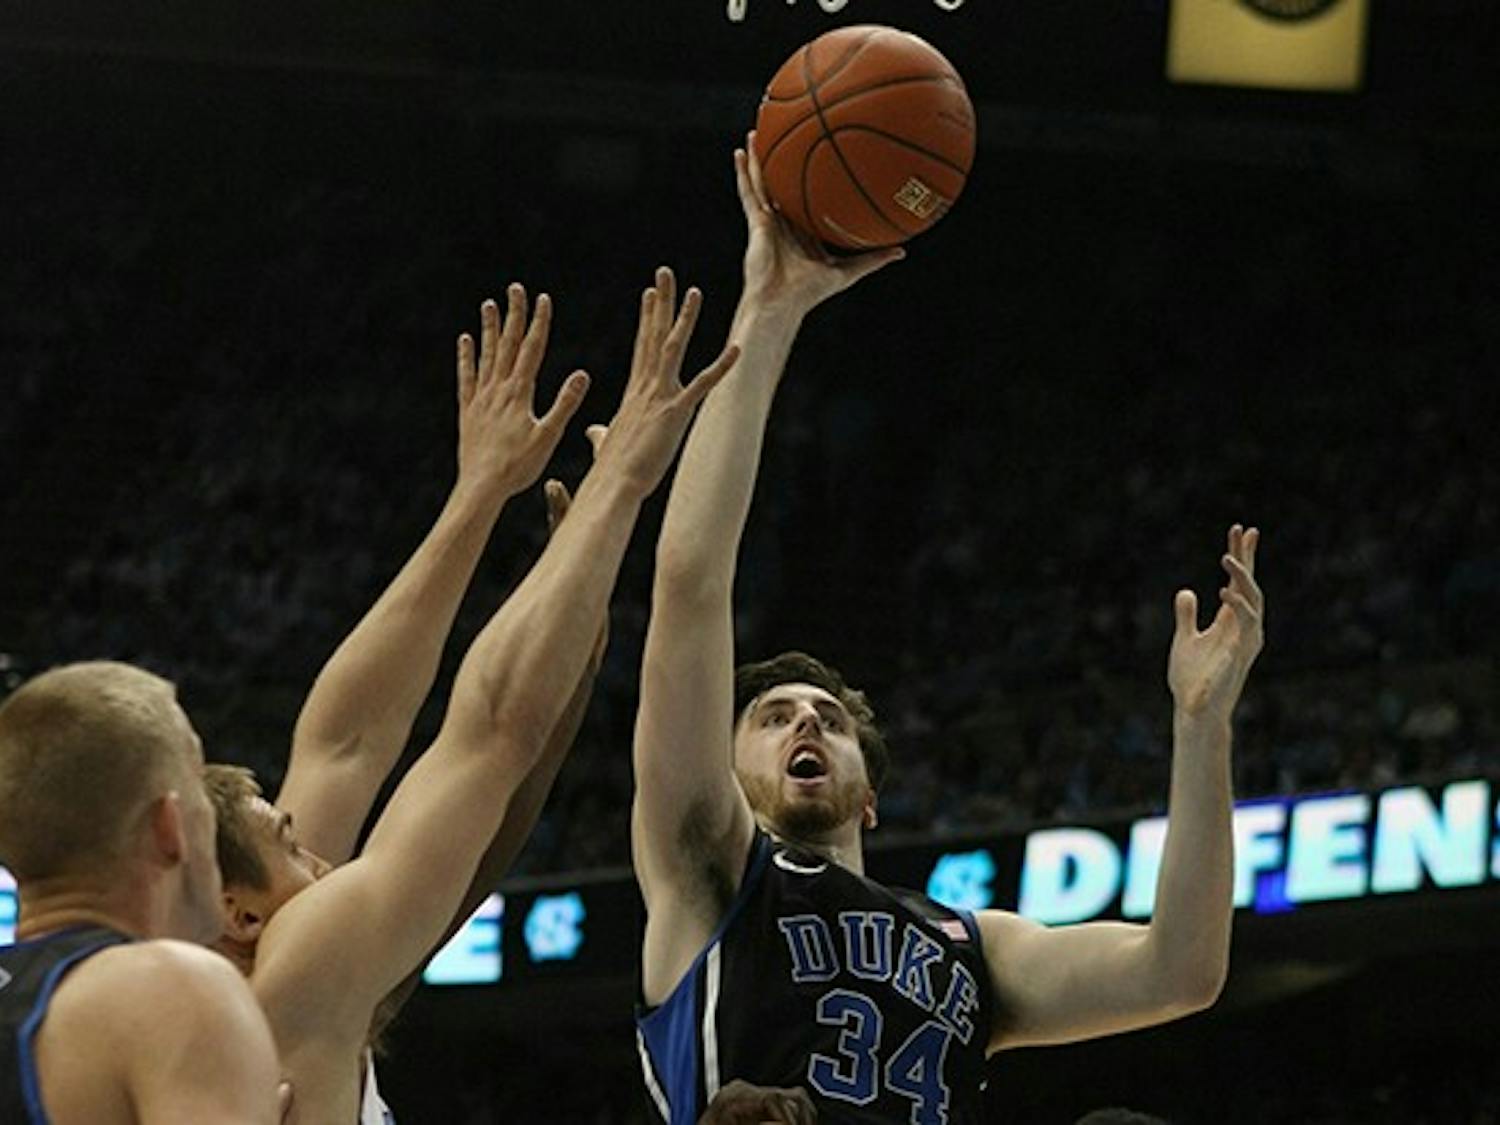 Even though Ryan Kelly has been back for just three games, Duke showed the team's chemistry is in top form with the rout of North Carolina.